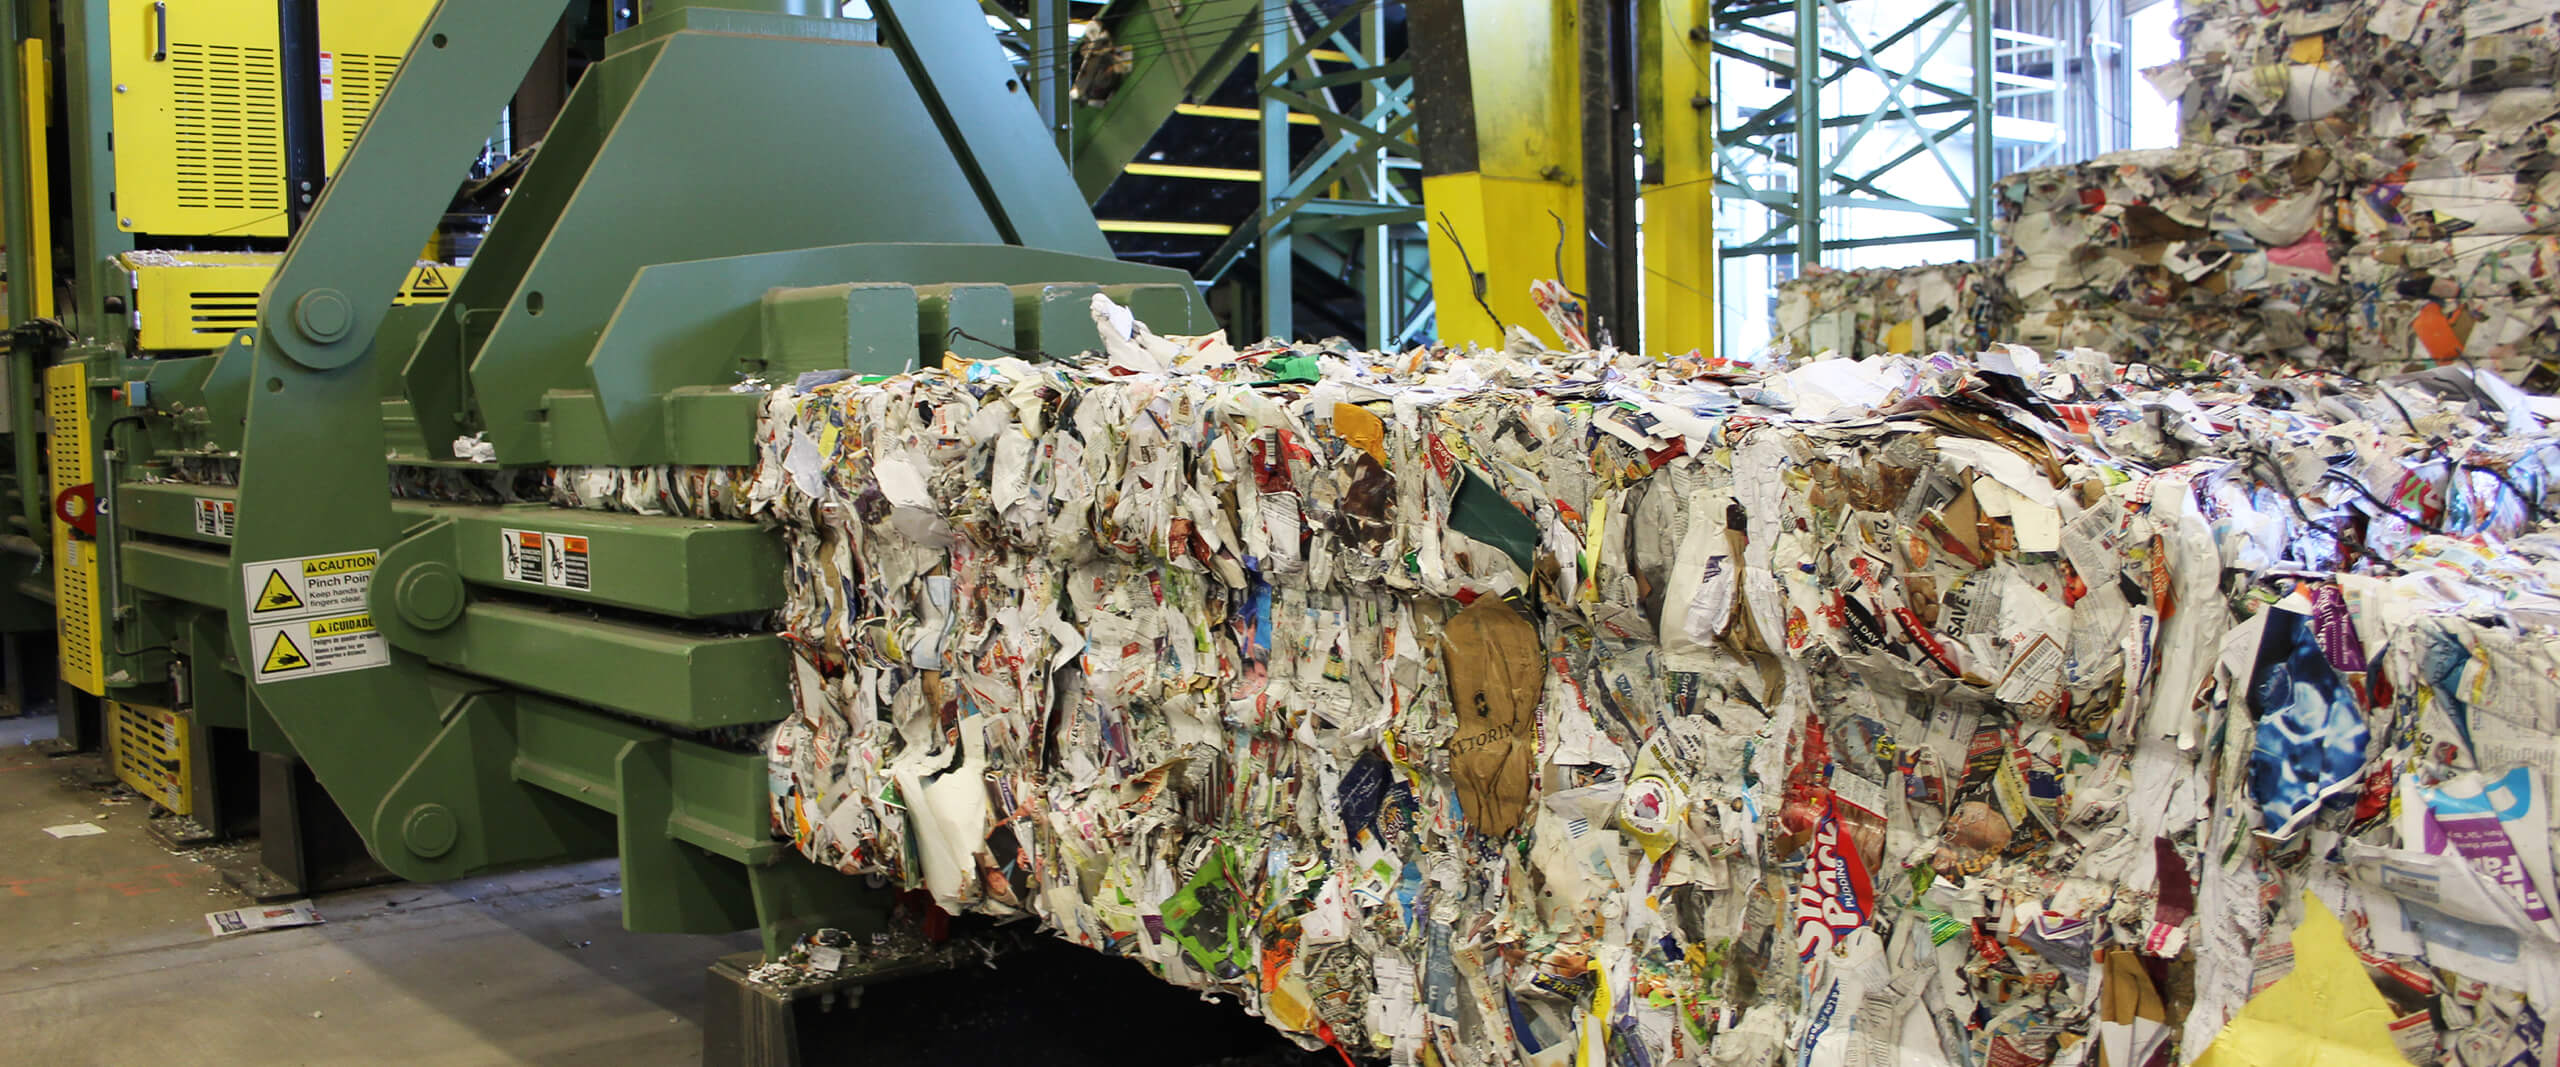 Trash being compacted at the Central Acceptance Facility